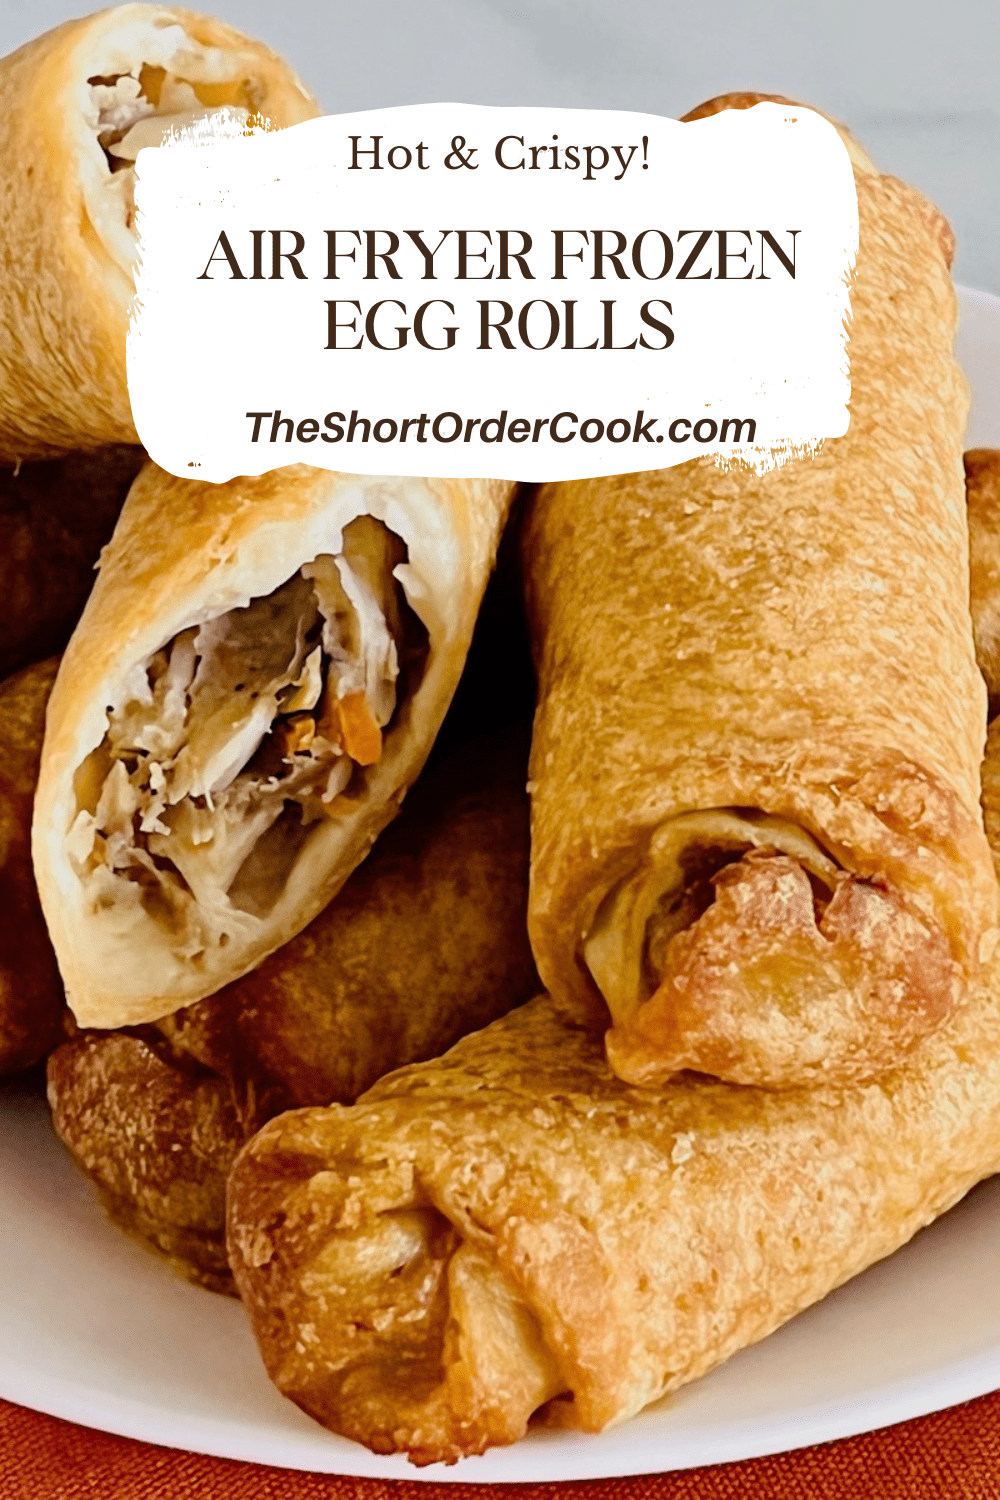 Air Fryer Frozen Egg Rolls plated and ready to eat.